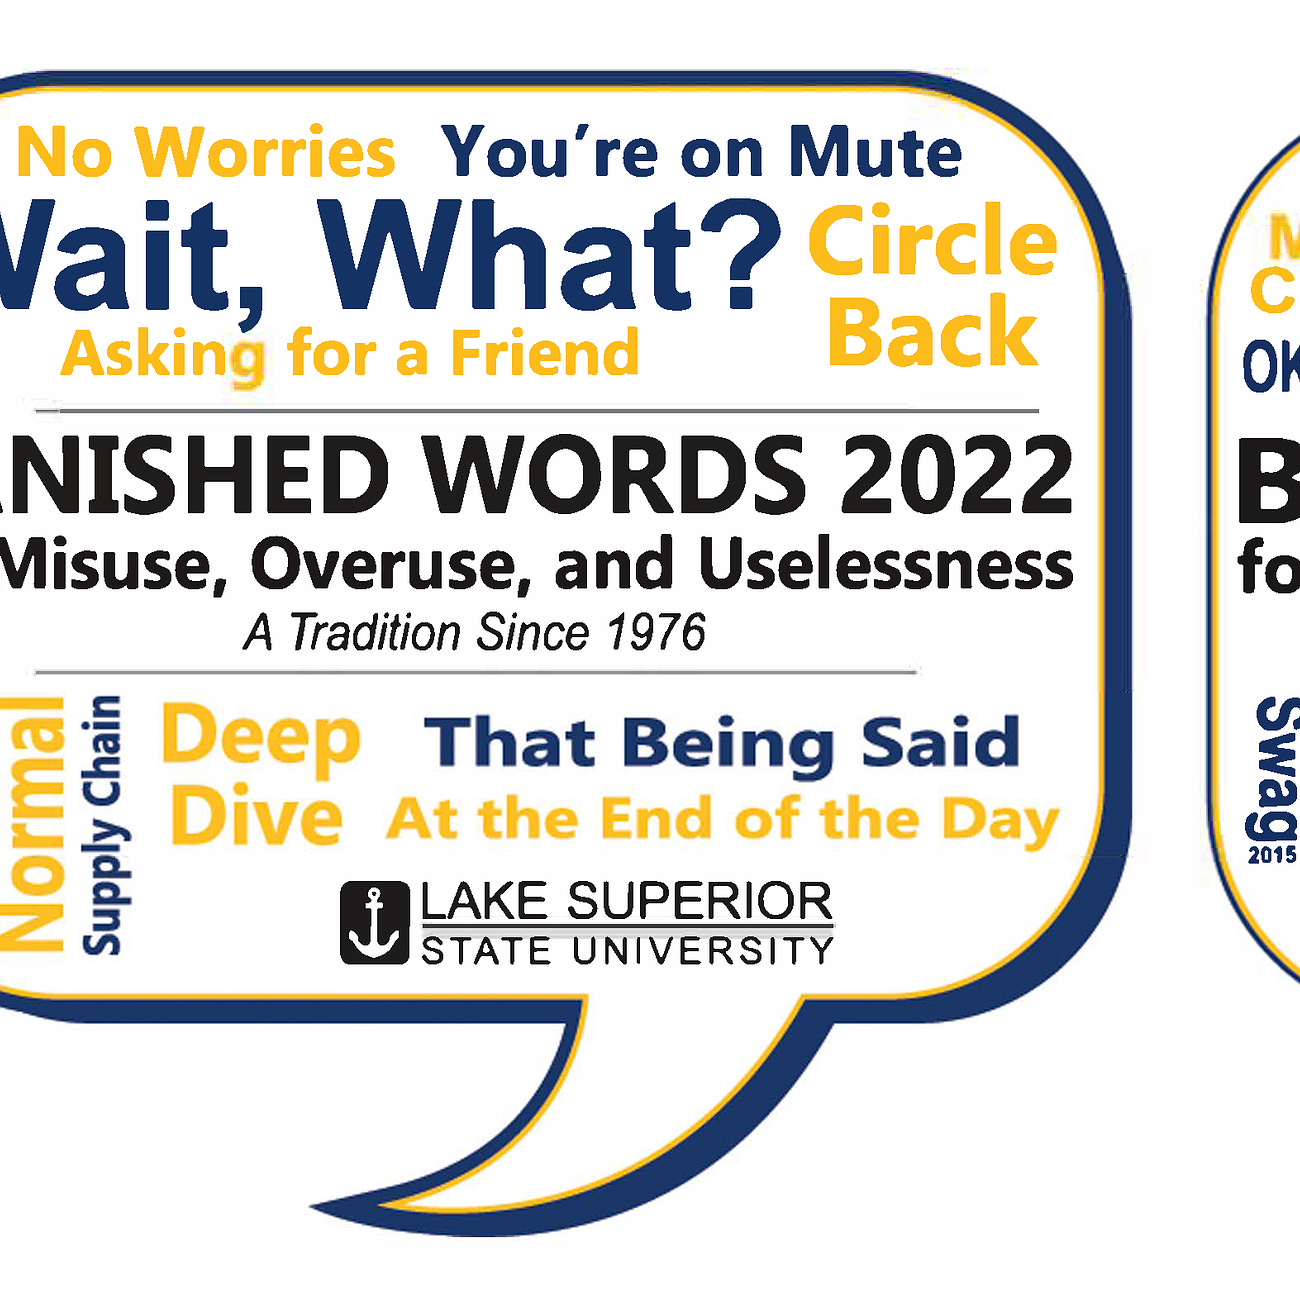 Banished Words Listed By Year 1976 - 2022